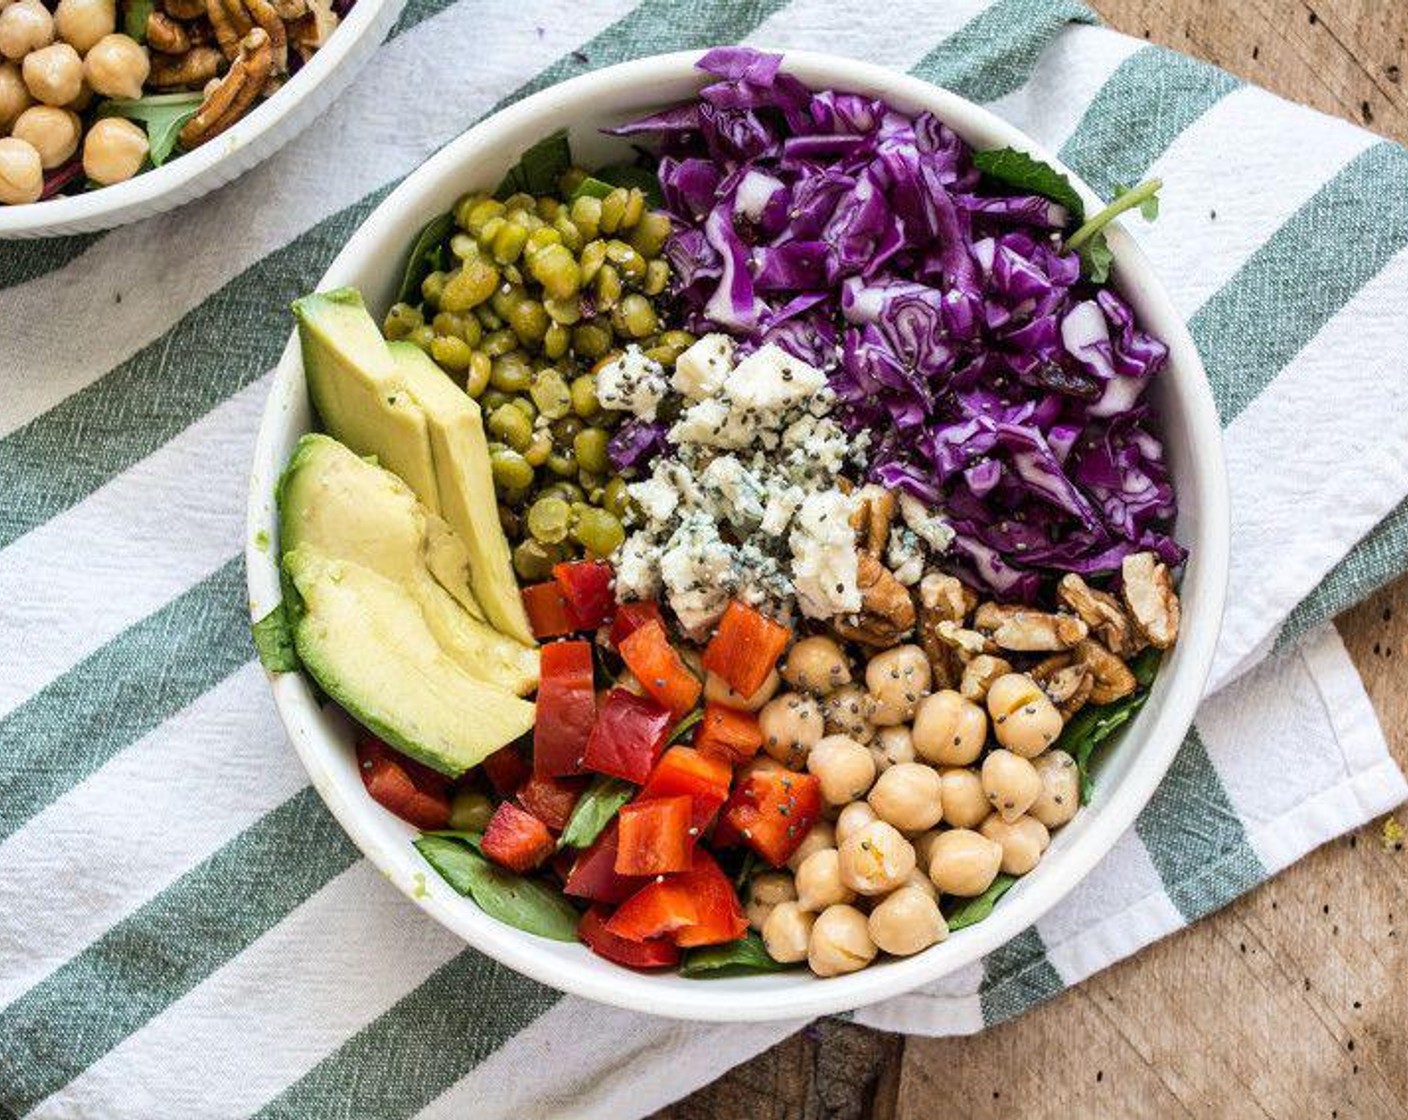 step 4 Top with Red Cabbage (1 cup), split peas, Canned Chickpeas (1/2 cup), Red Bell Pepper (1/4 cup), Pecans (1/4 cup), Avocado (1/4), Blue Cheese (3 Tbsp) and sprinkle with Chia Seeds (to taste) and your favorite salad dressing. Serve and enjoy!